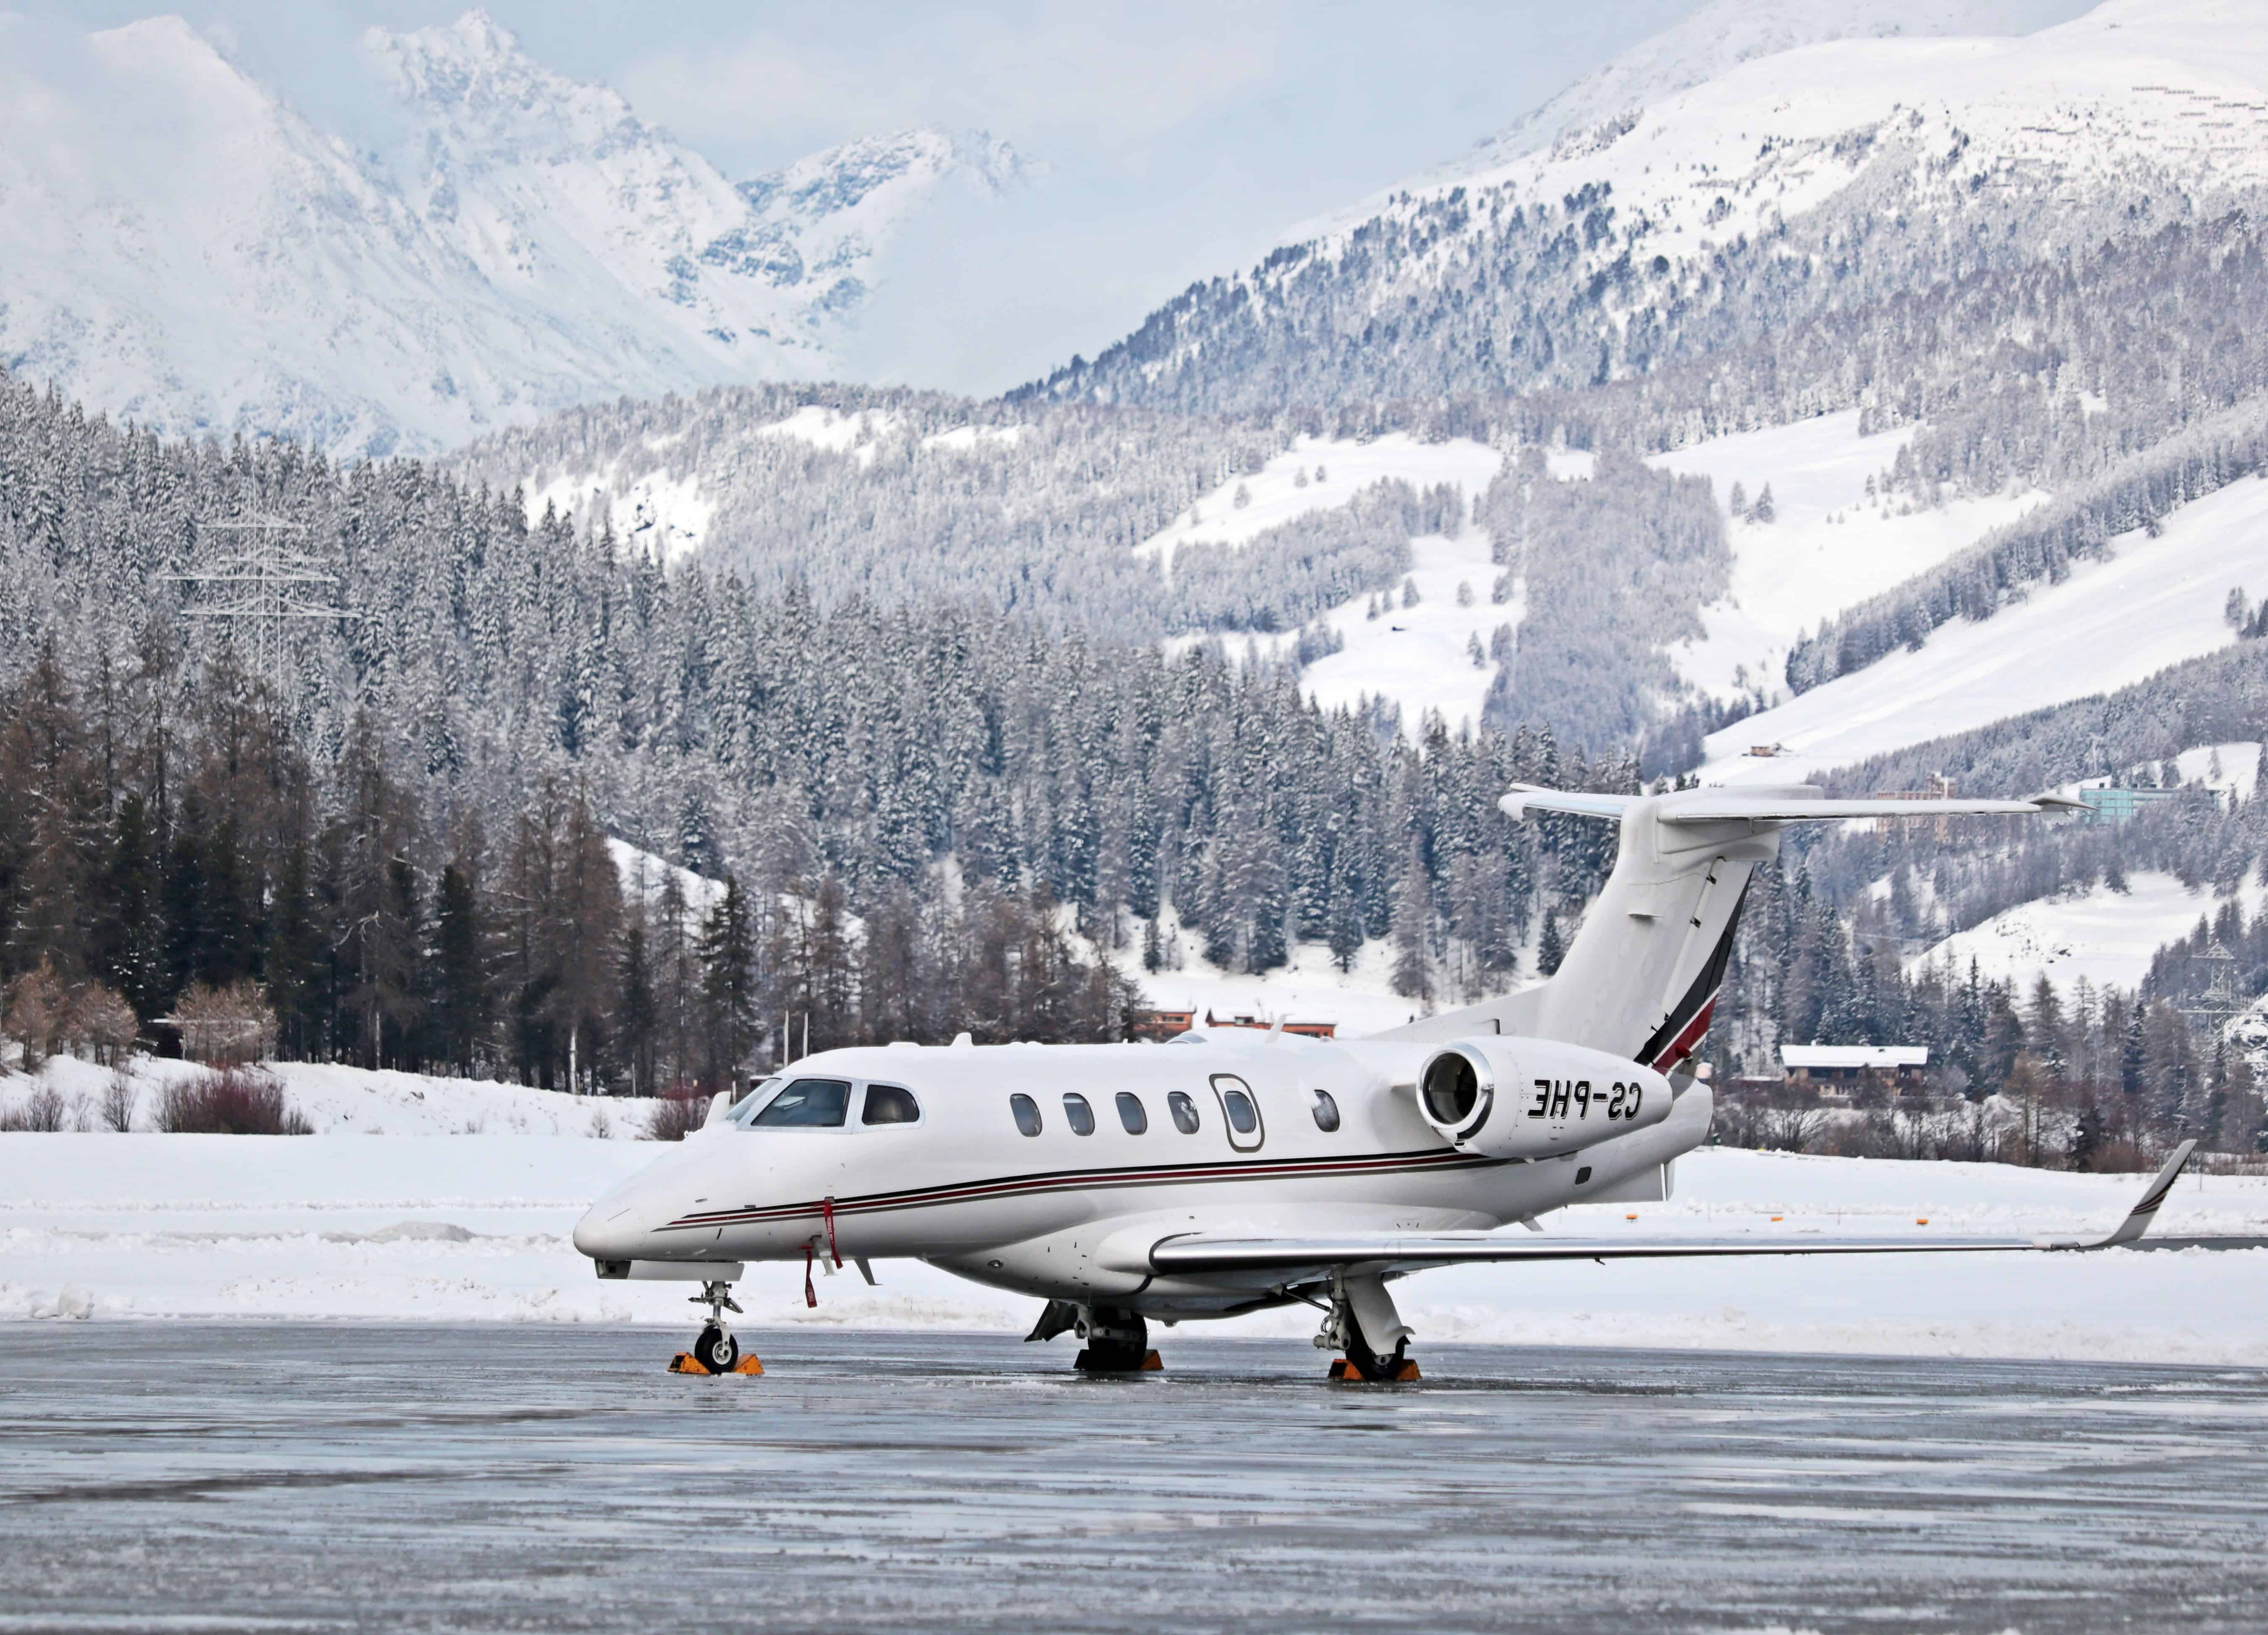 Free picture: vehicle, snow, outdoor, mountain, sky, plane, winter,  transport